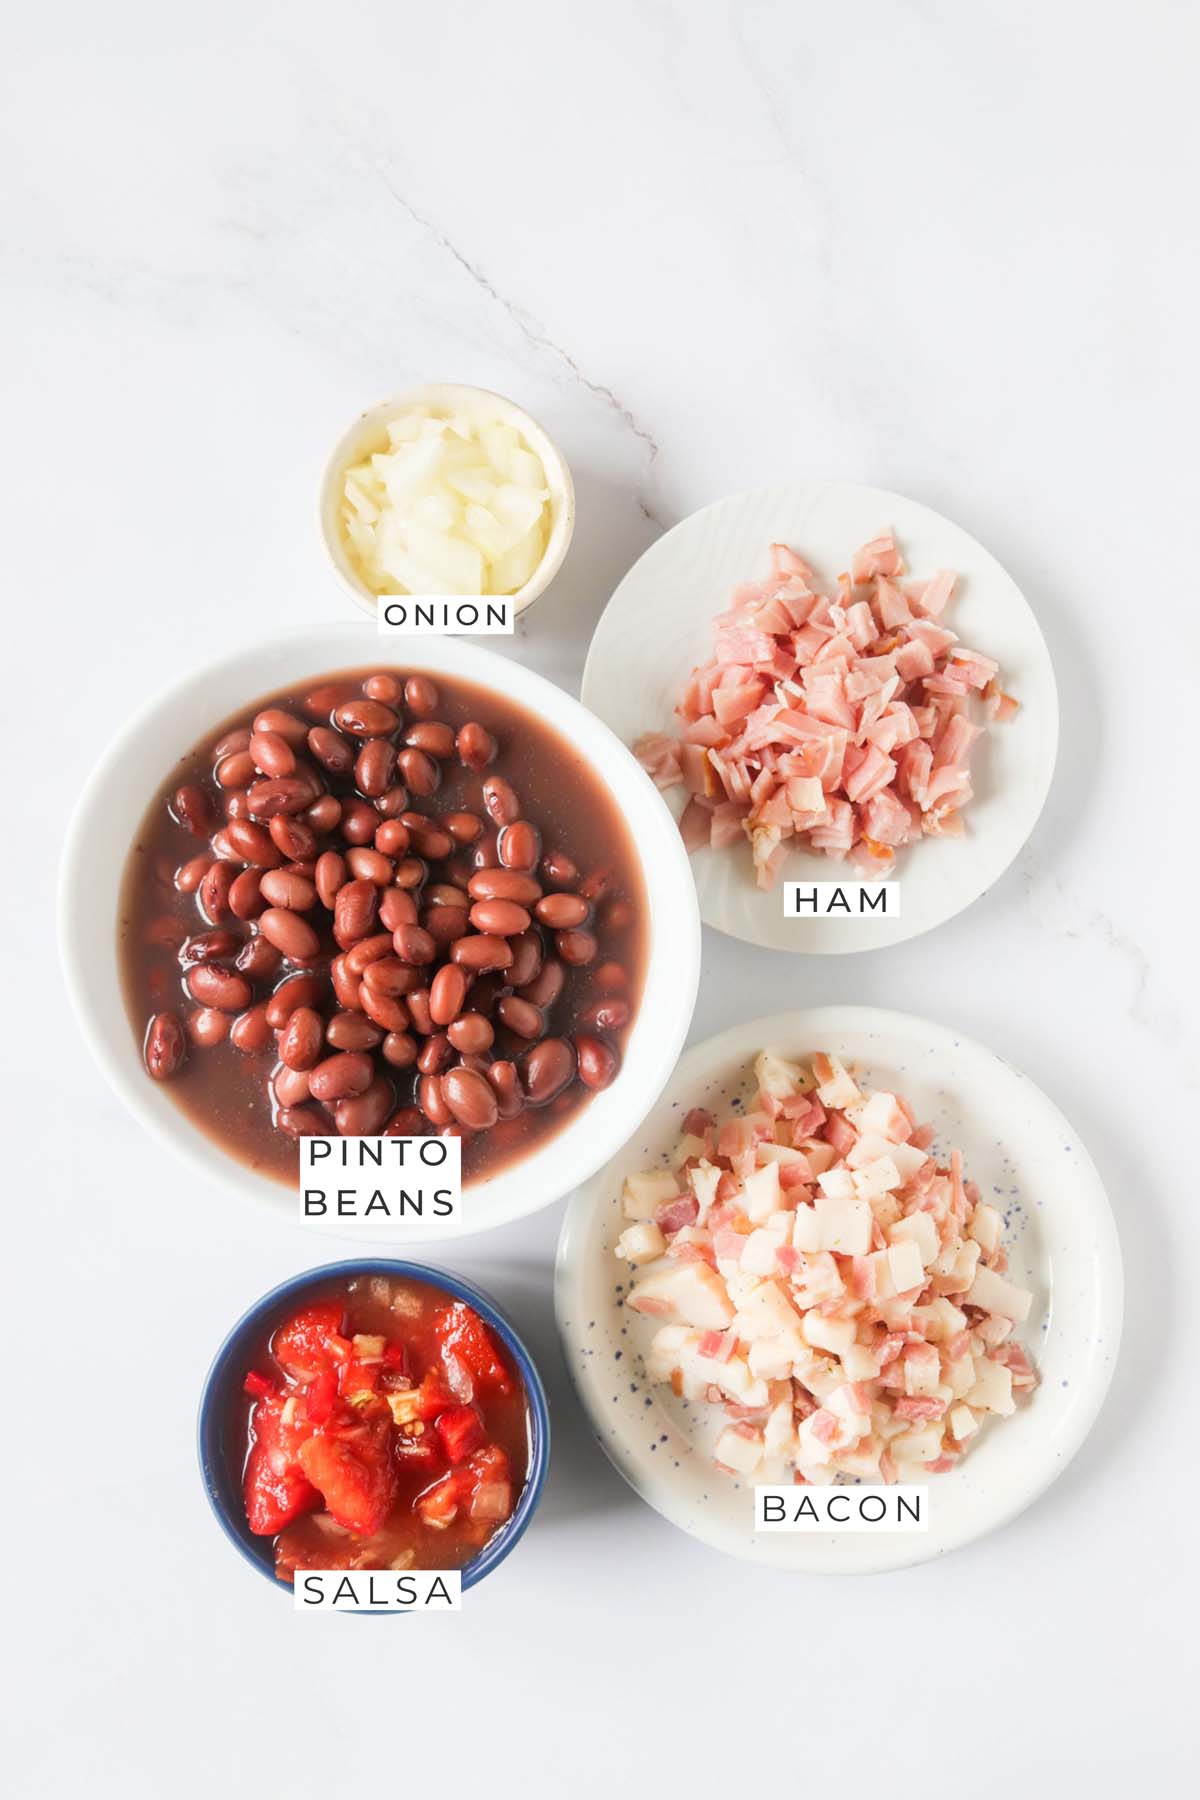 Labeled ingredients for the beans.